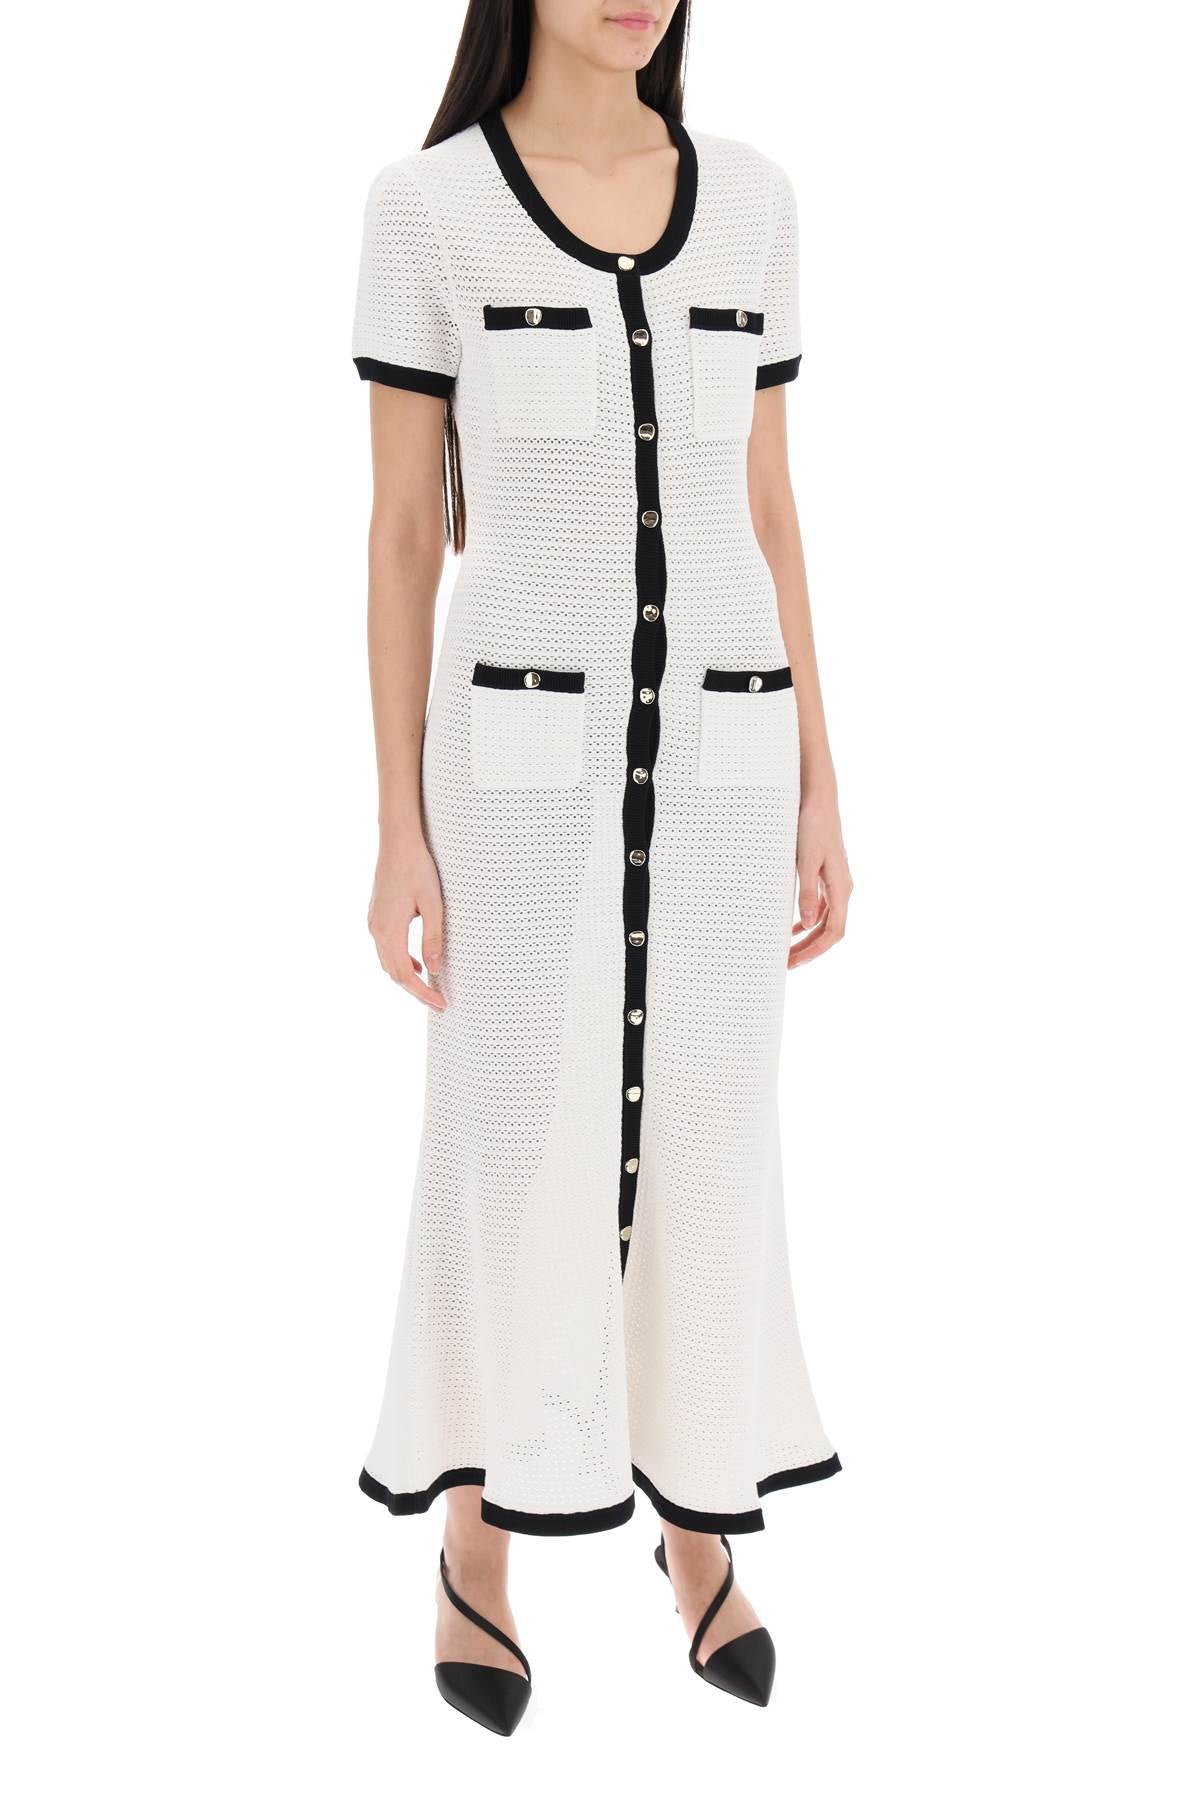 "maxi crochet dress with contrasting borders"-1